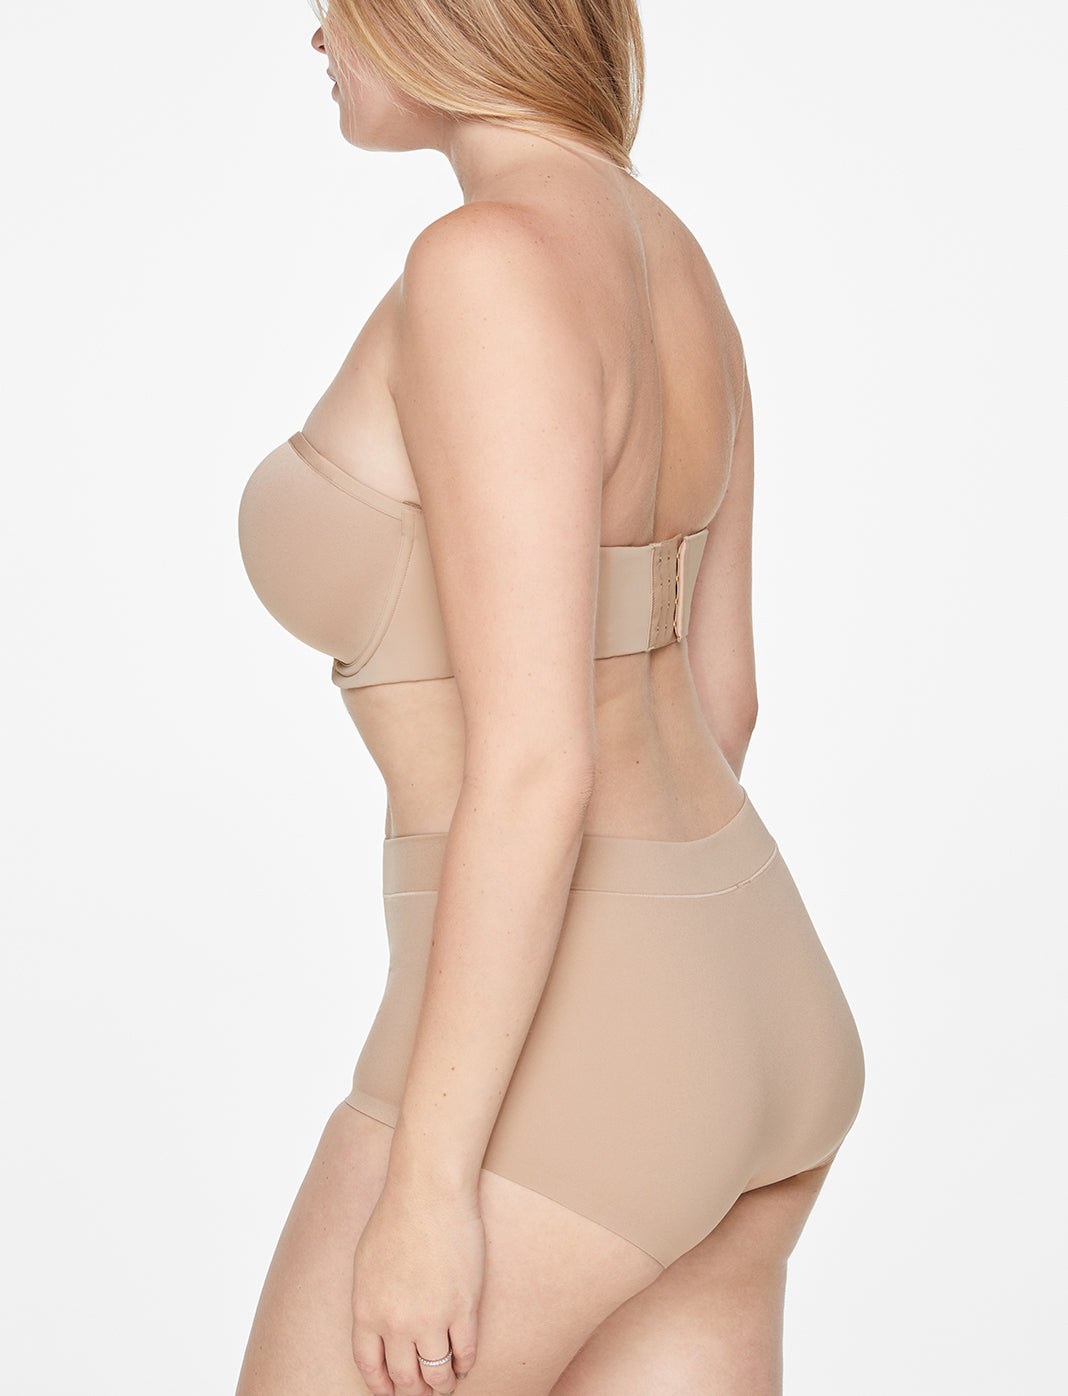 Our Editors Were Shocked That This Wireless Strapless Bra Stays Put and  Offers All-Day Comfort and Support - Yahoo Sports